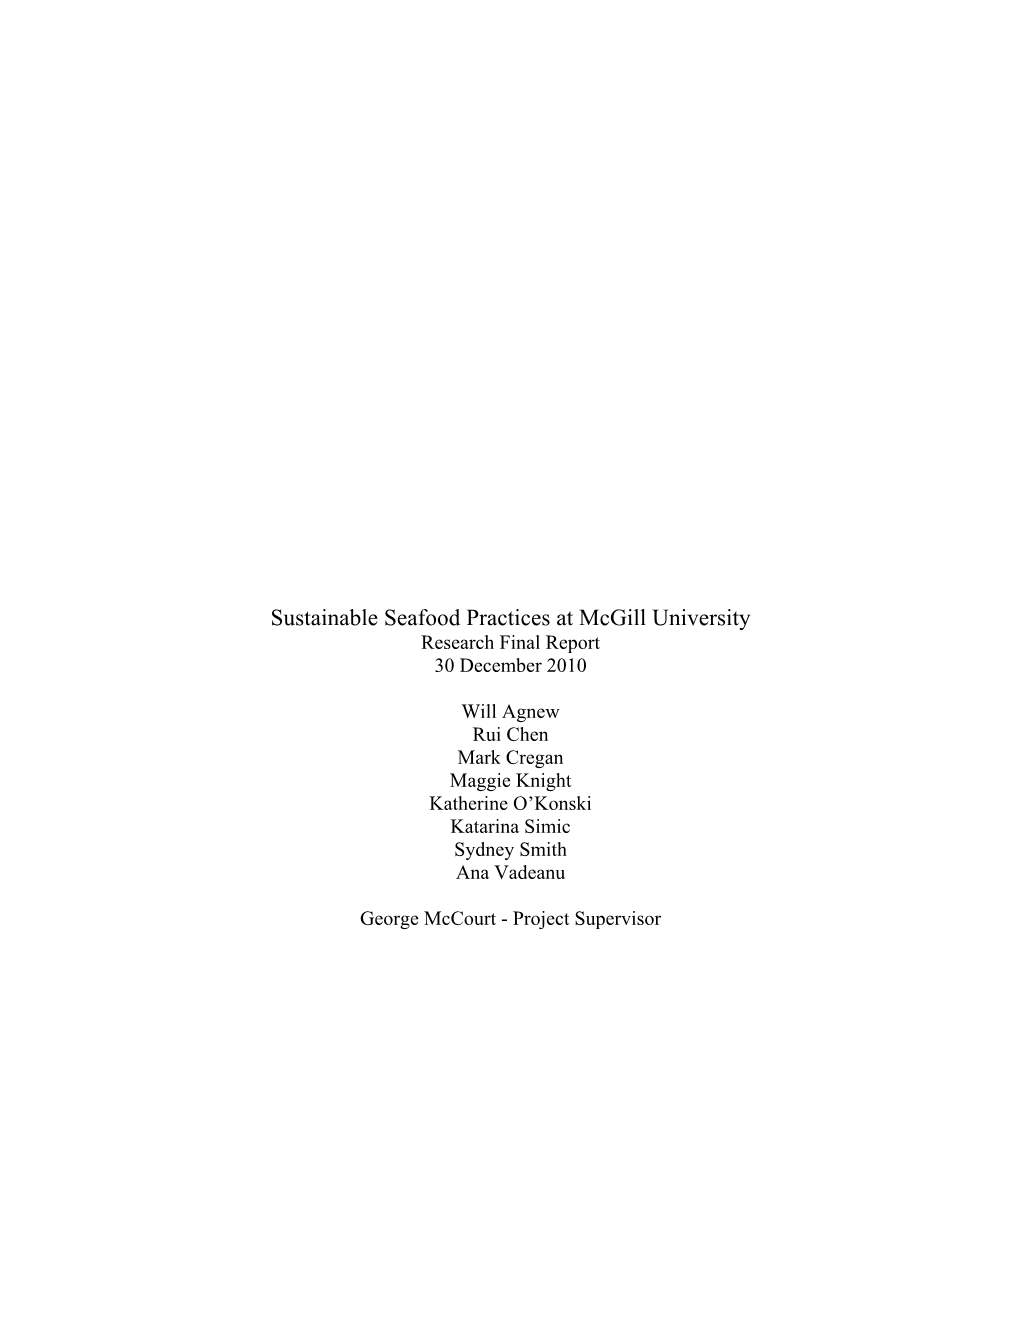 Sustainable Seafood Practices at Mcgill University Research Final Report 30 December 2010